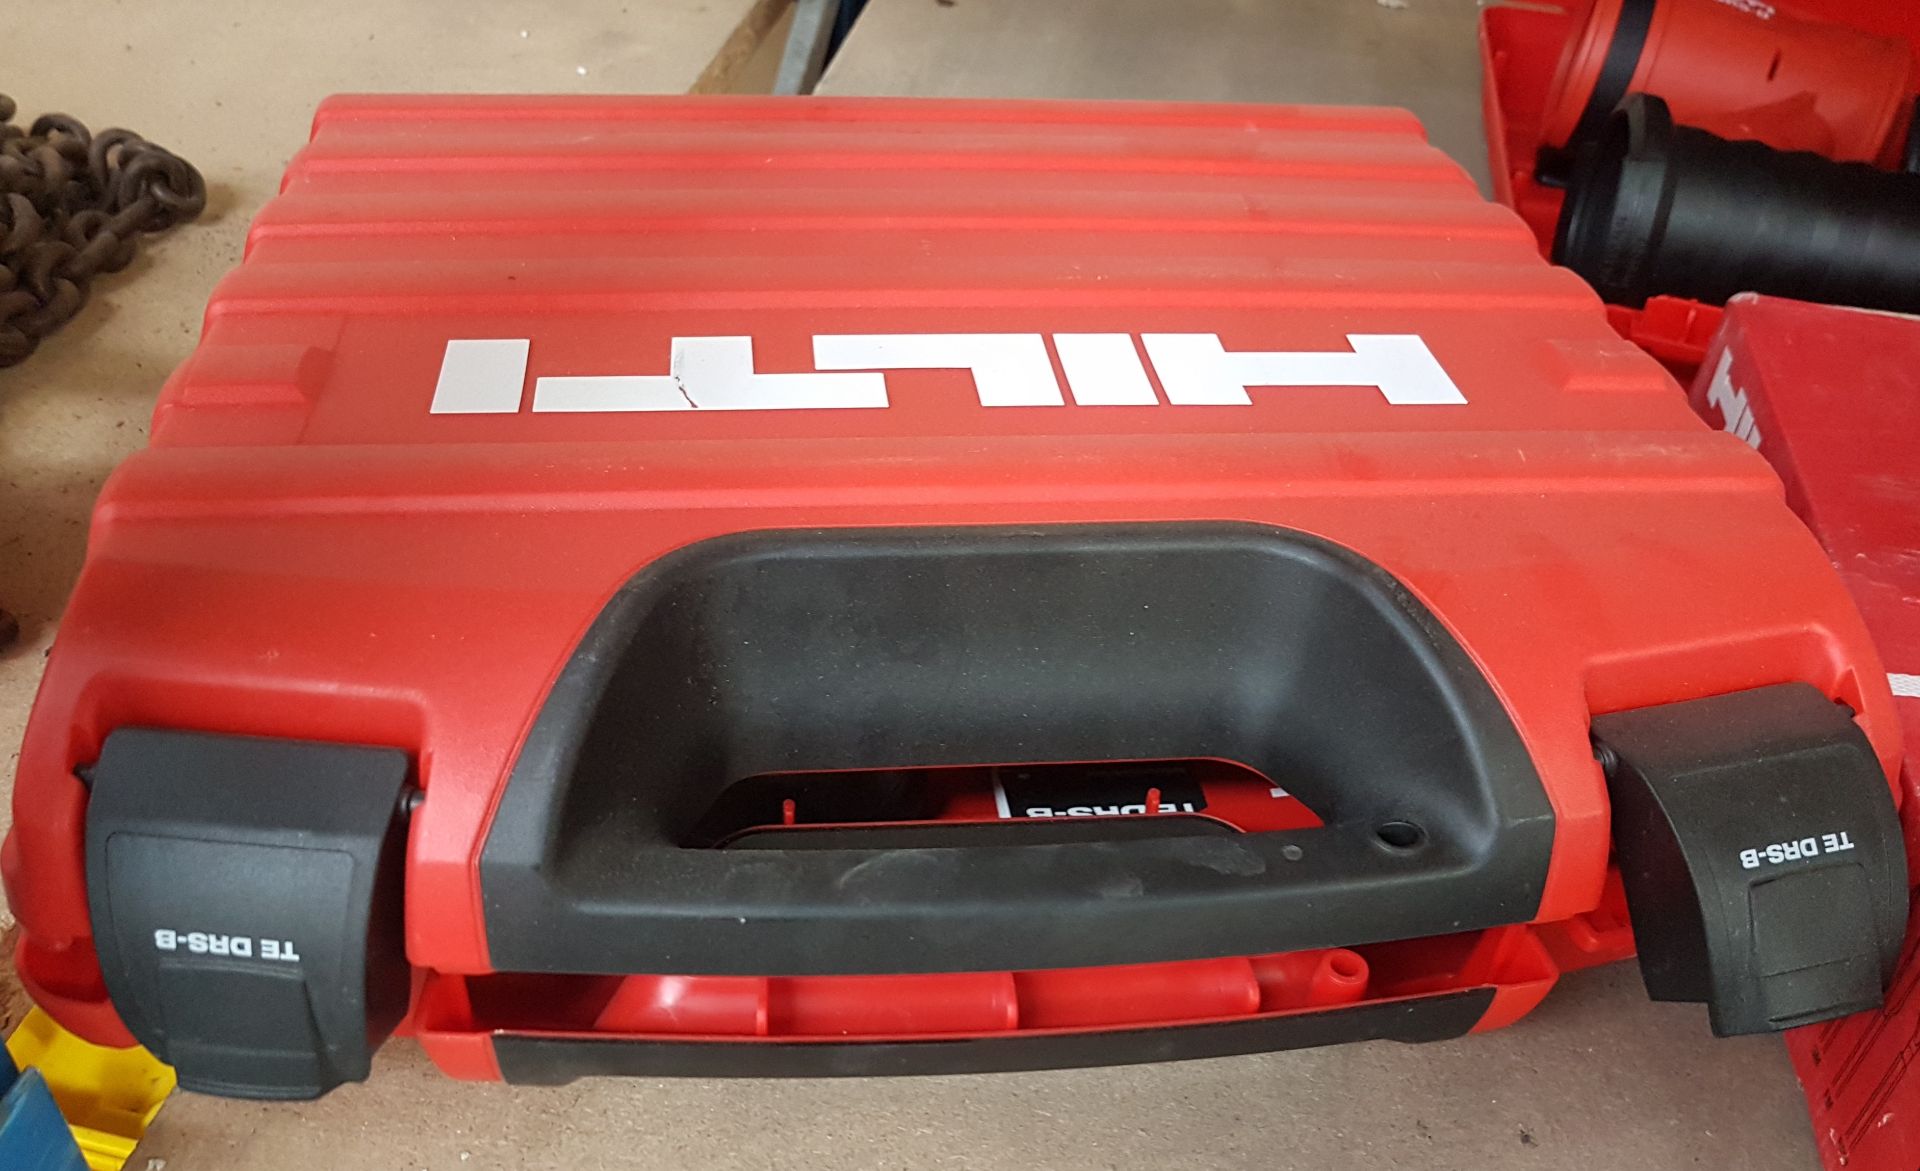 2 x Hilti Dust Removal Systems With On-Board Vacuum System - TE DRS-B - Includes Protection Carry - Image 2 of 6